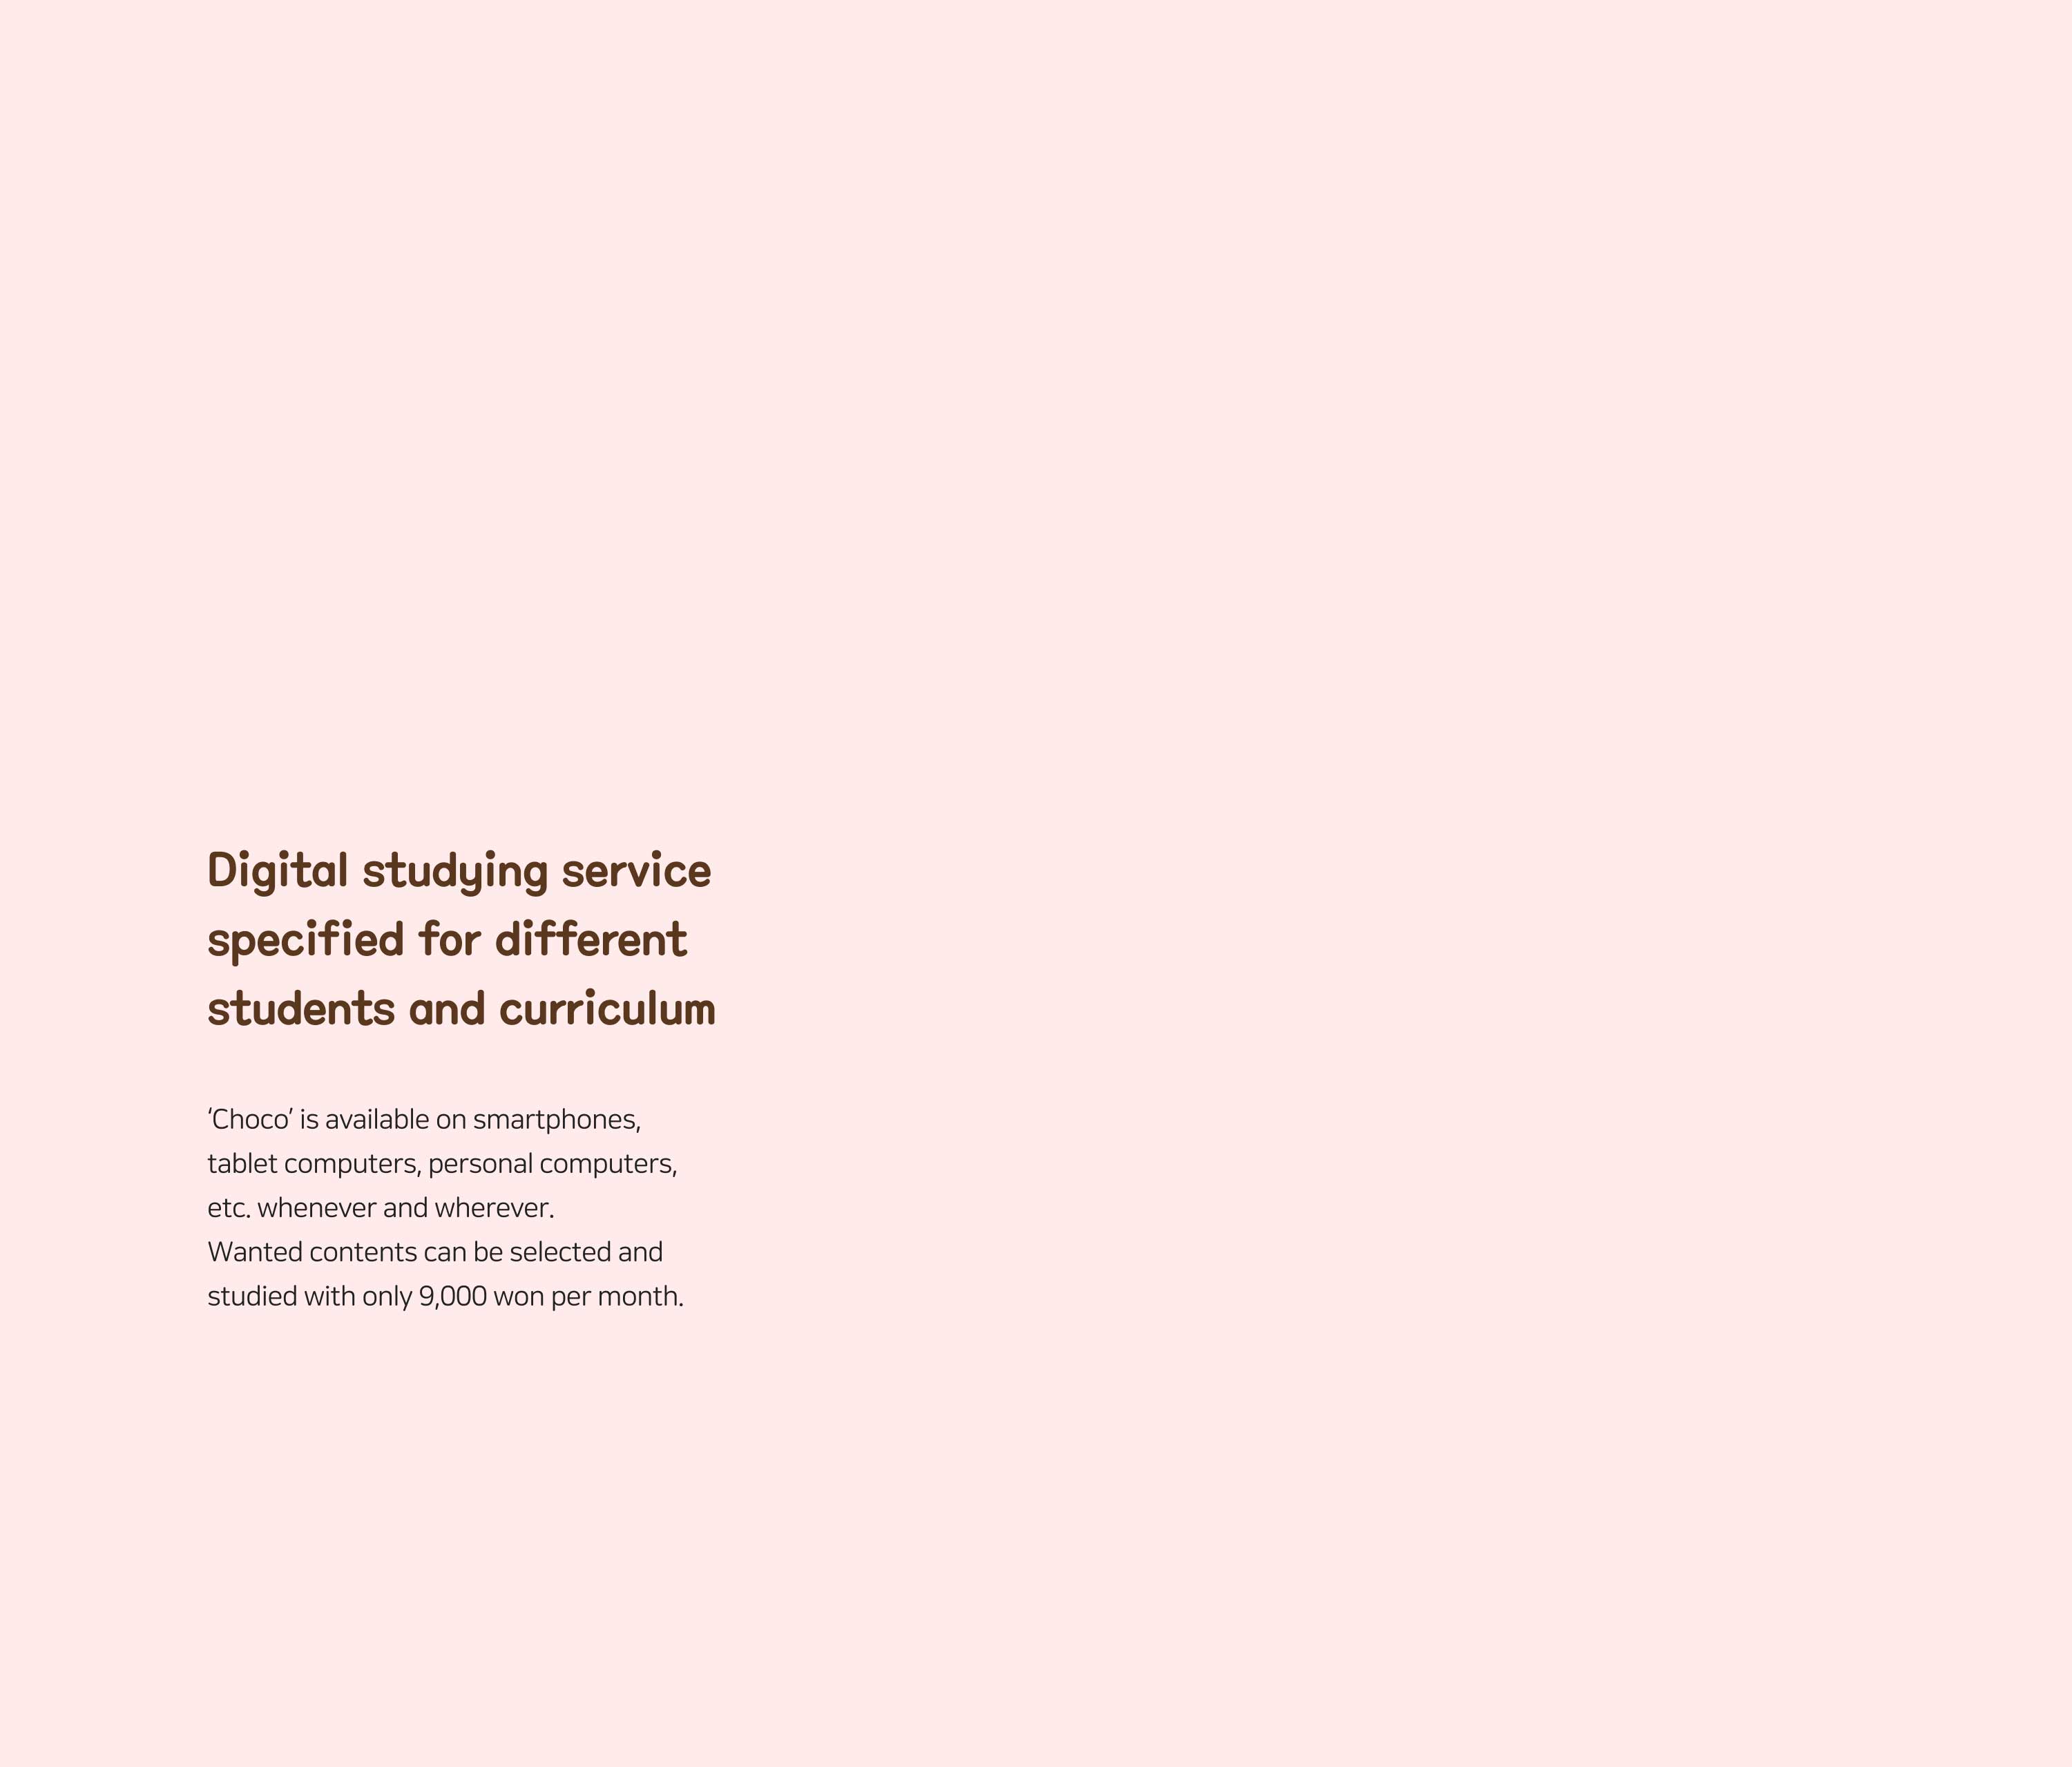 Digital studying service specificed for different students and curriculum